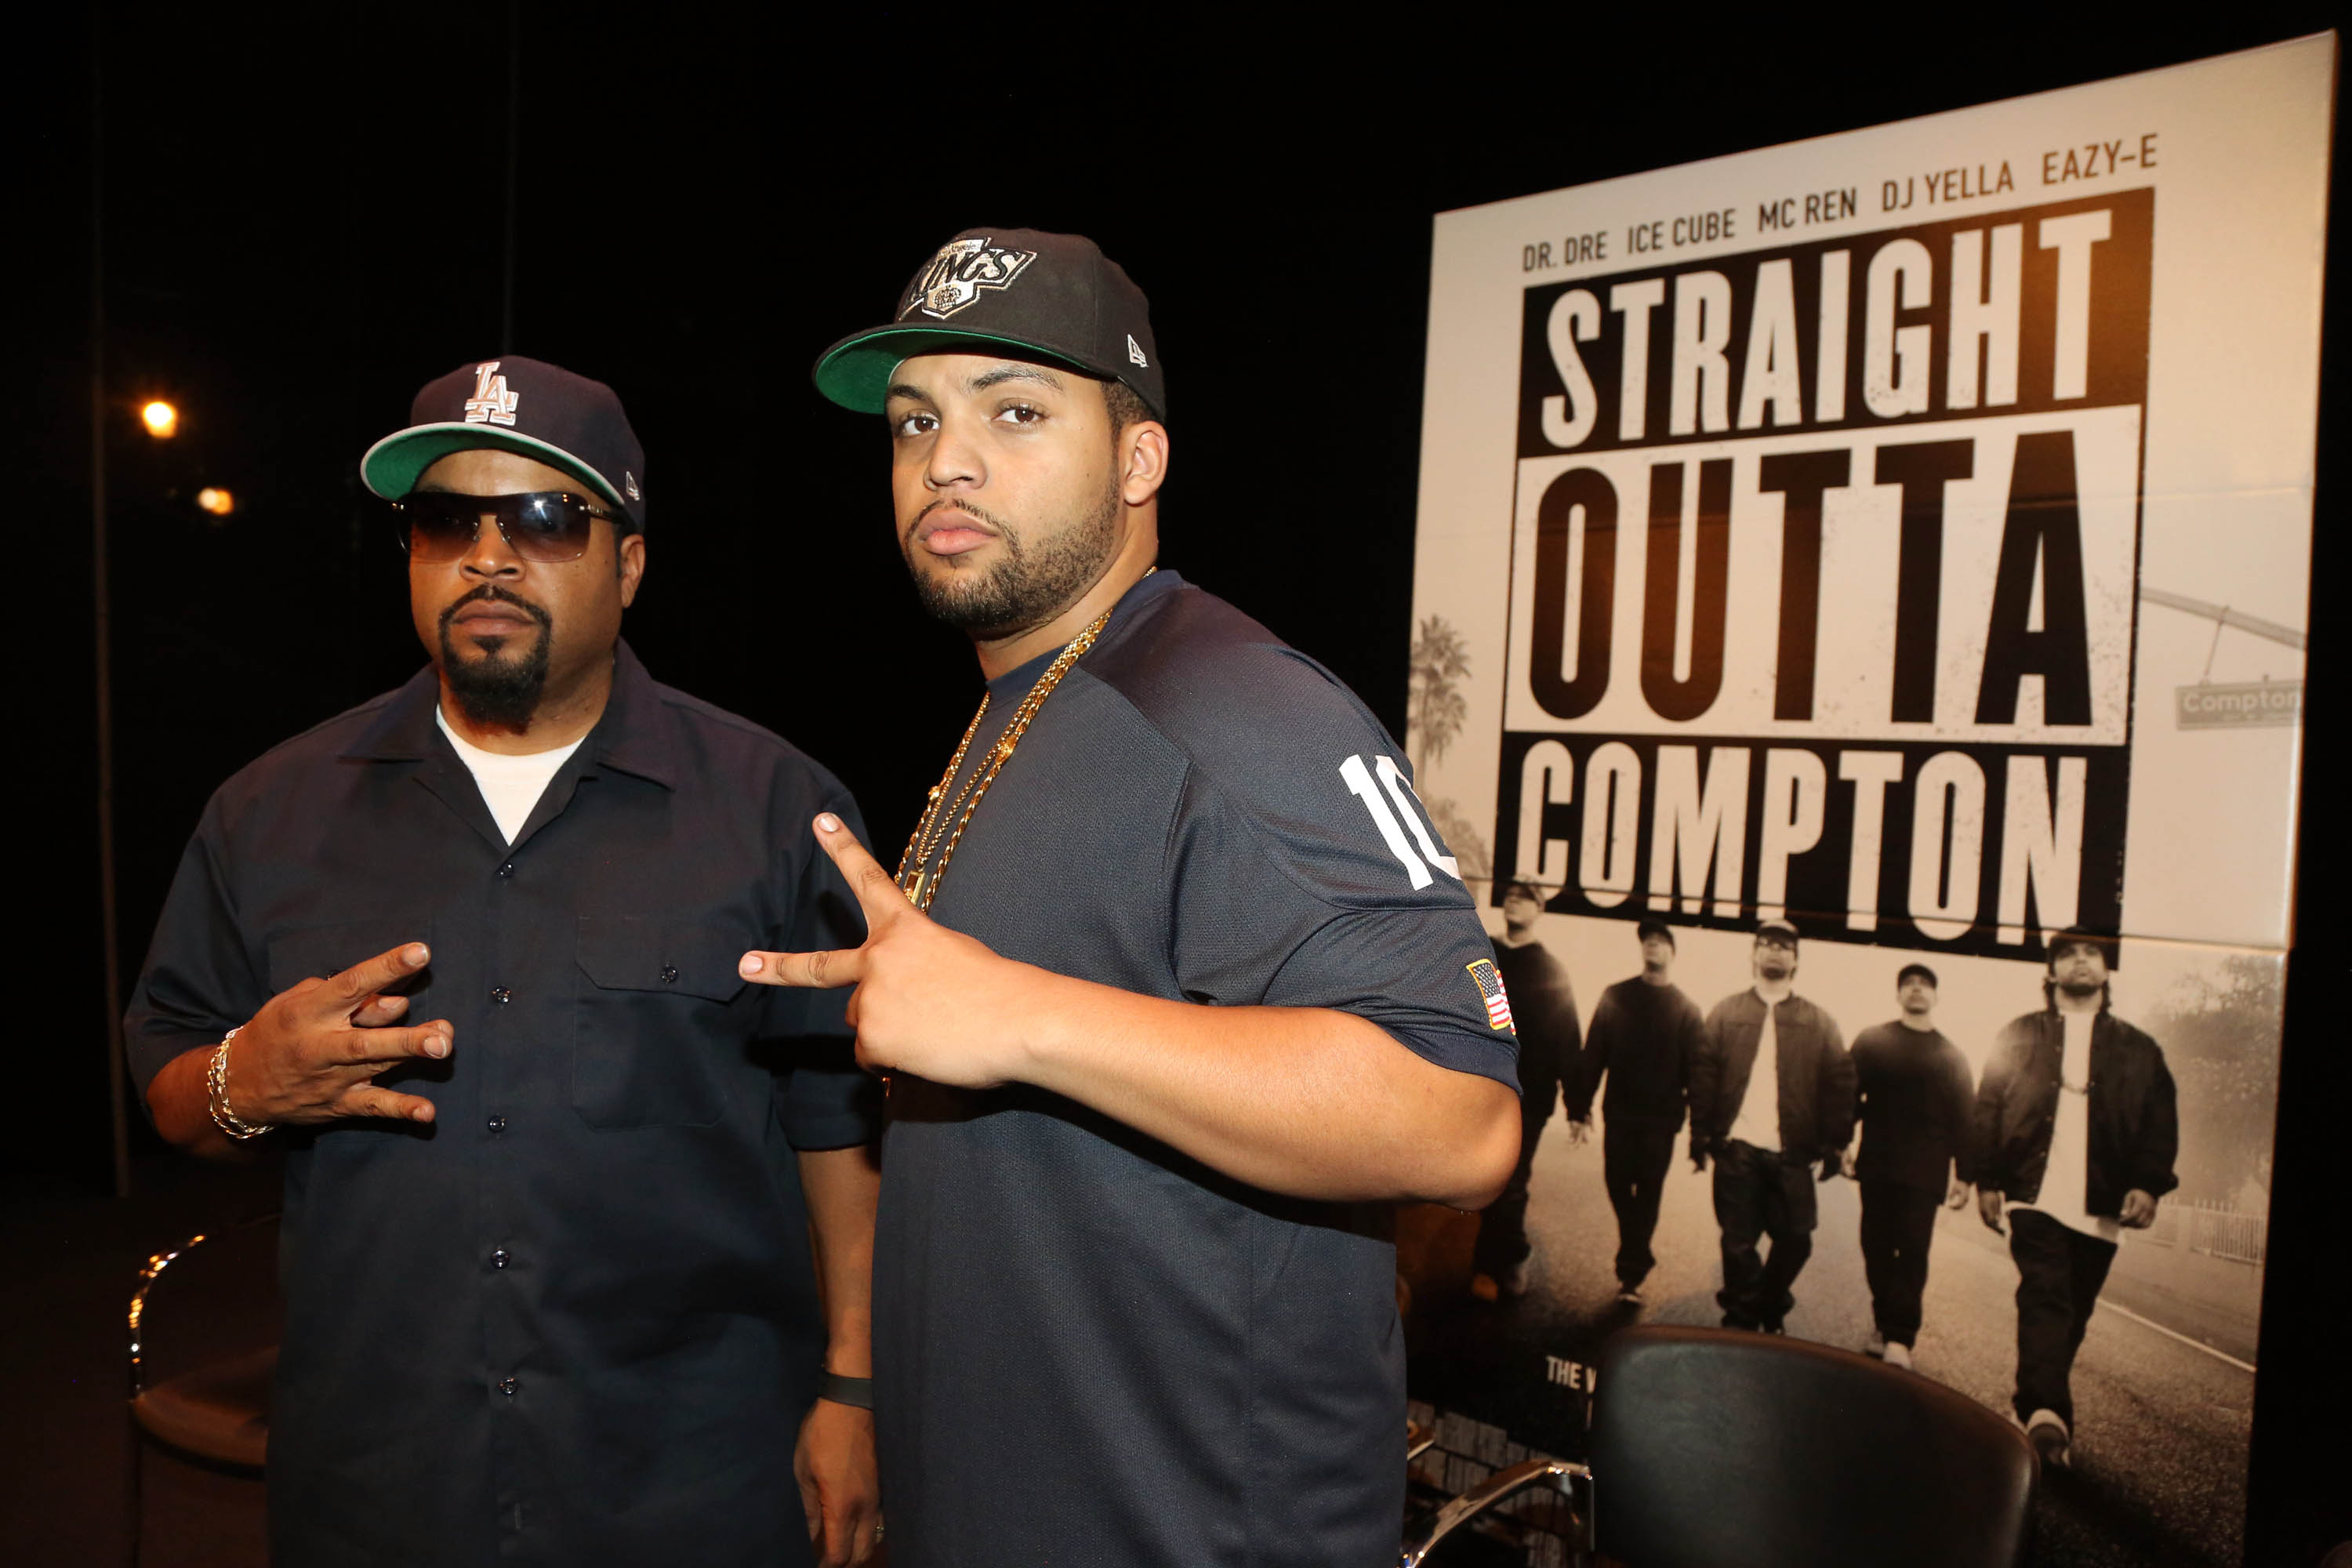 Ice Cube (left) and O'Shea Jackson Jr. attend the 'Straight Outta Compton' New York screening in New York City. (Johnny Nunez&mdash;Getty Images)